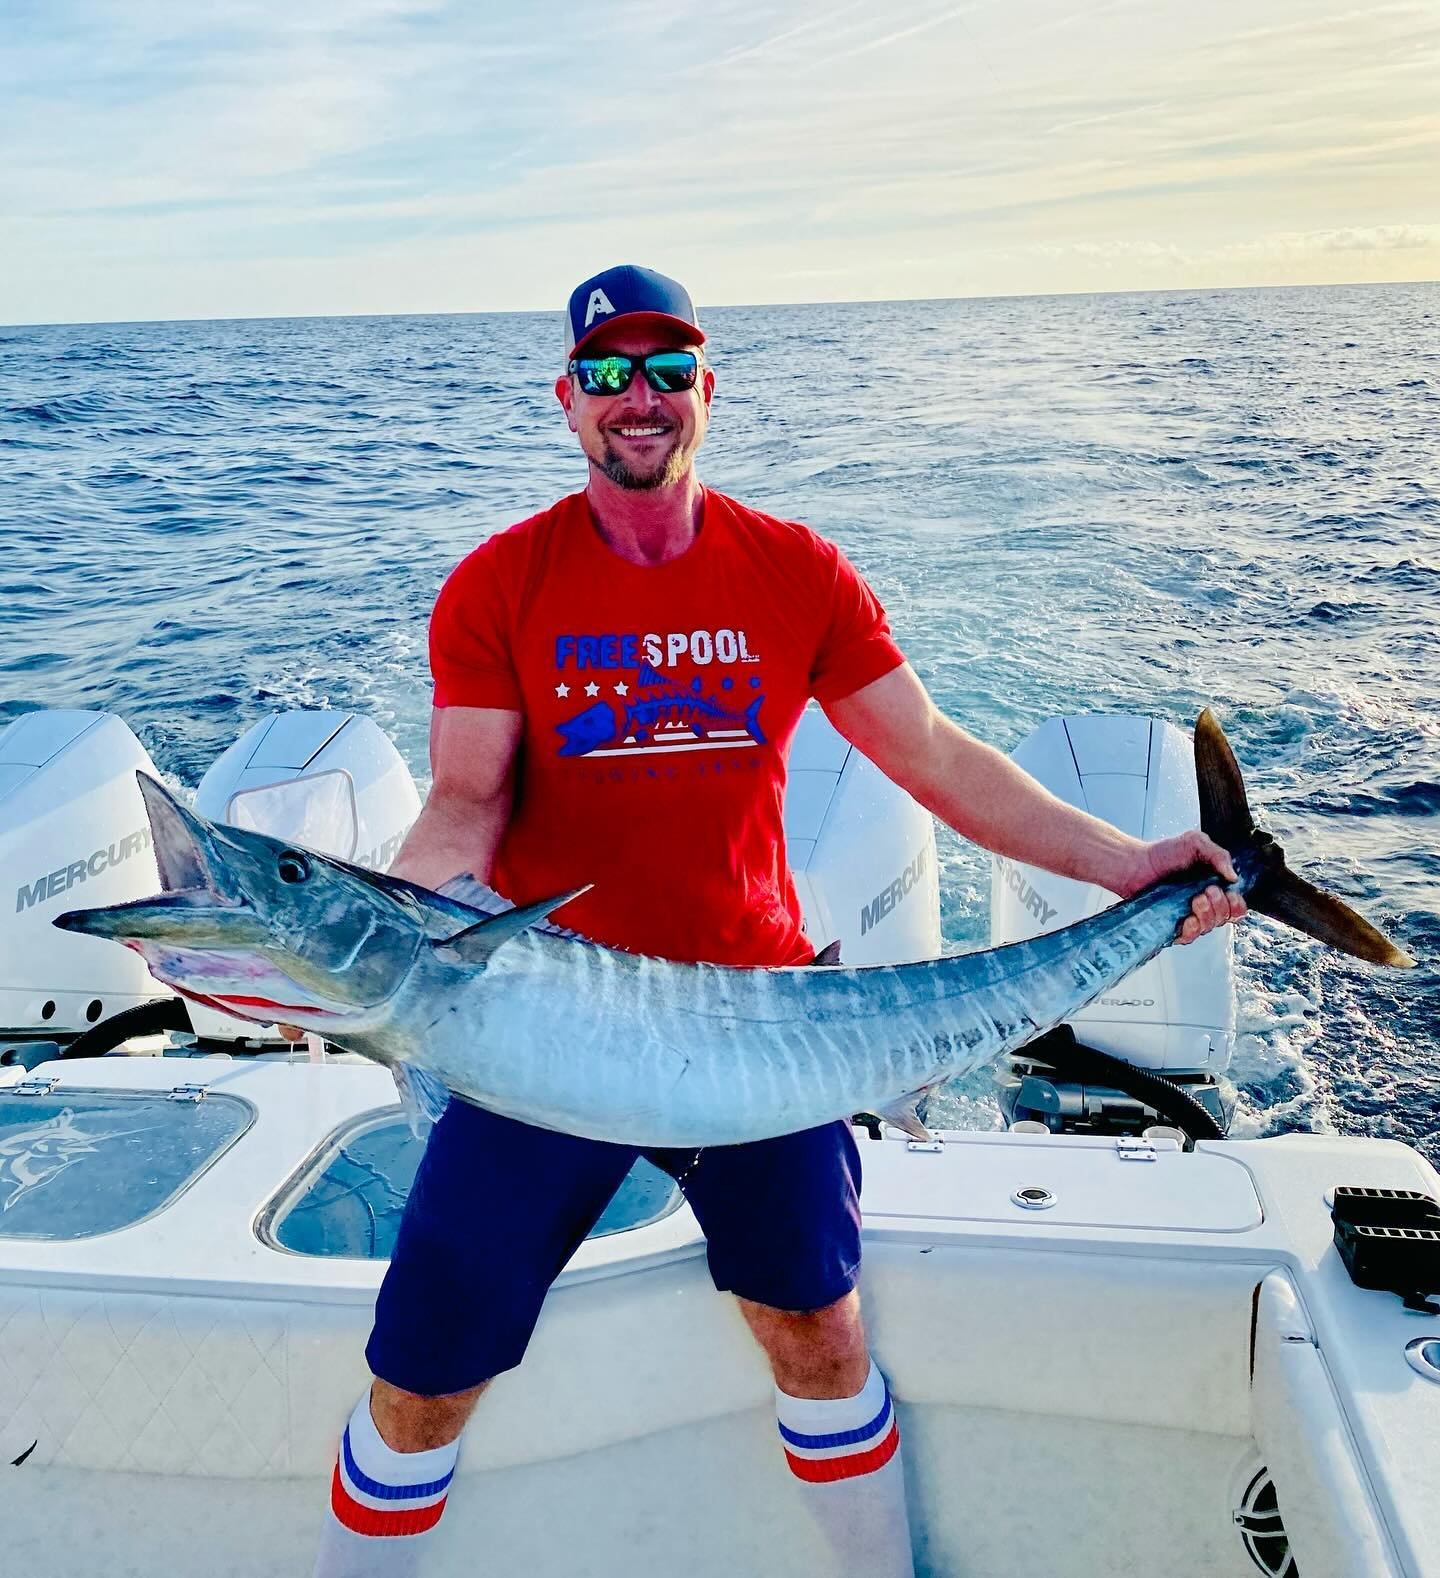 🦓🔥

@SaltFeverGuideService&mdash;&gt; 910.250.3021
.
.
LIKE OUR PAGE TO FOLLOW THE SQUAD
🇺🇸🐟🇺🇸🐟🇺🇸🐟🇺🇸🐟🇺🇸🐟🇺🇸🐟🇺🇸🐟
.
@AmericanAquatic
.
.
| #SaltFeverGuideService | #AmericanAquatic | #OceanIsleBeachNc | #charterfishing
| #offshore